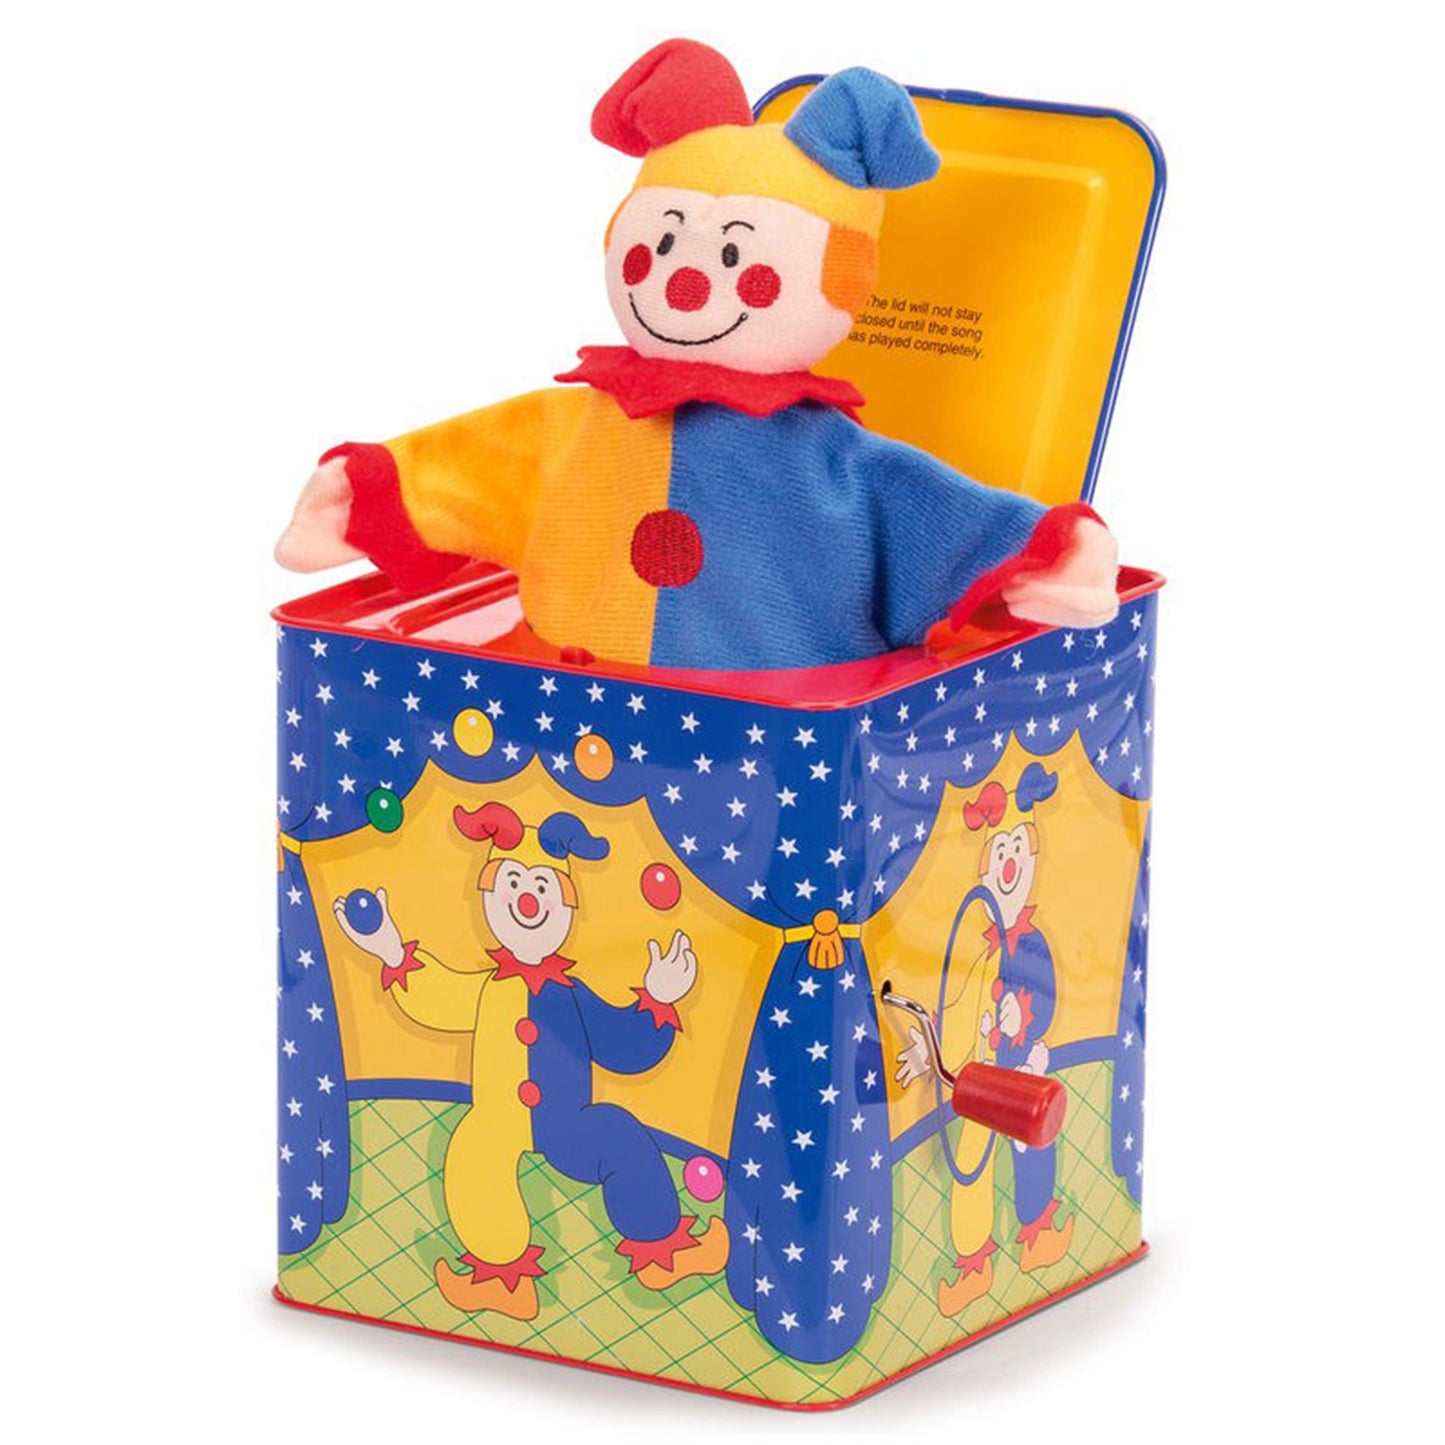 Jester Jack in the Box - Bigjigs Toys - The Forgotten Toy Shop